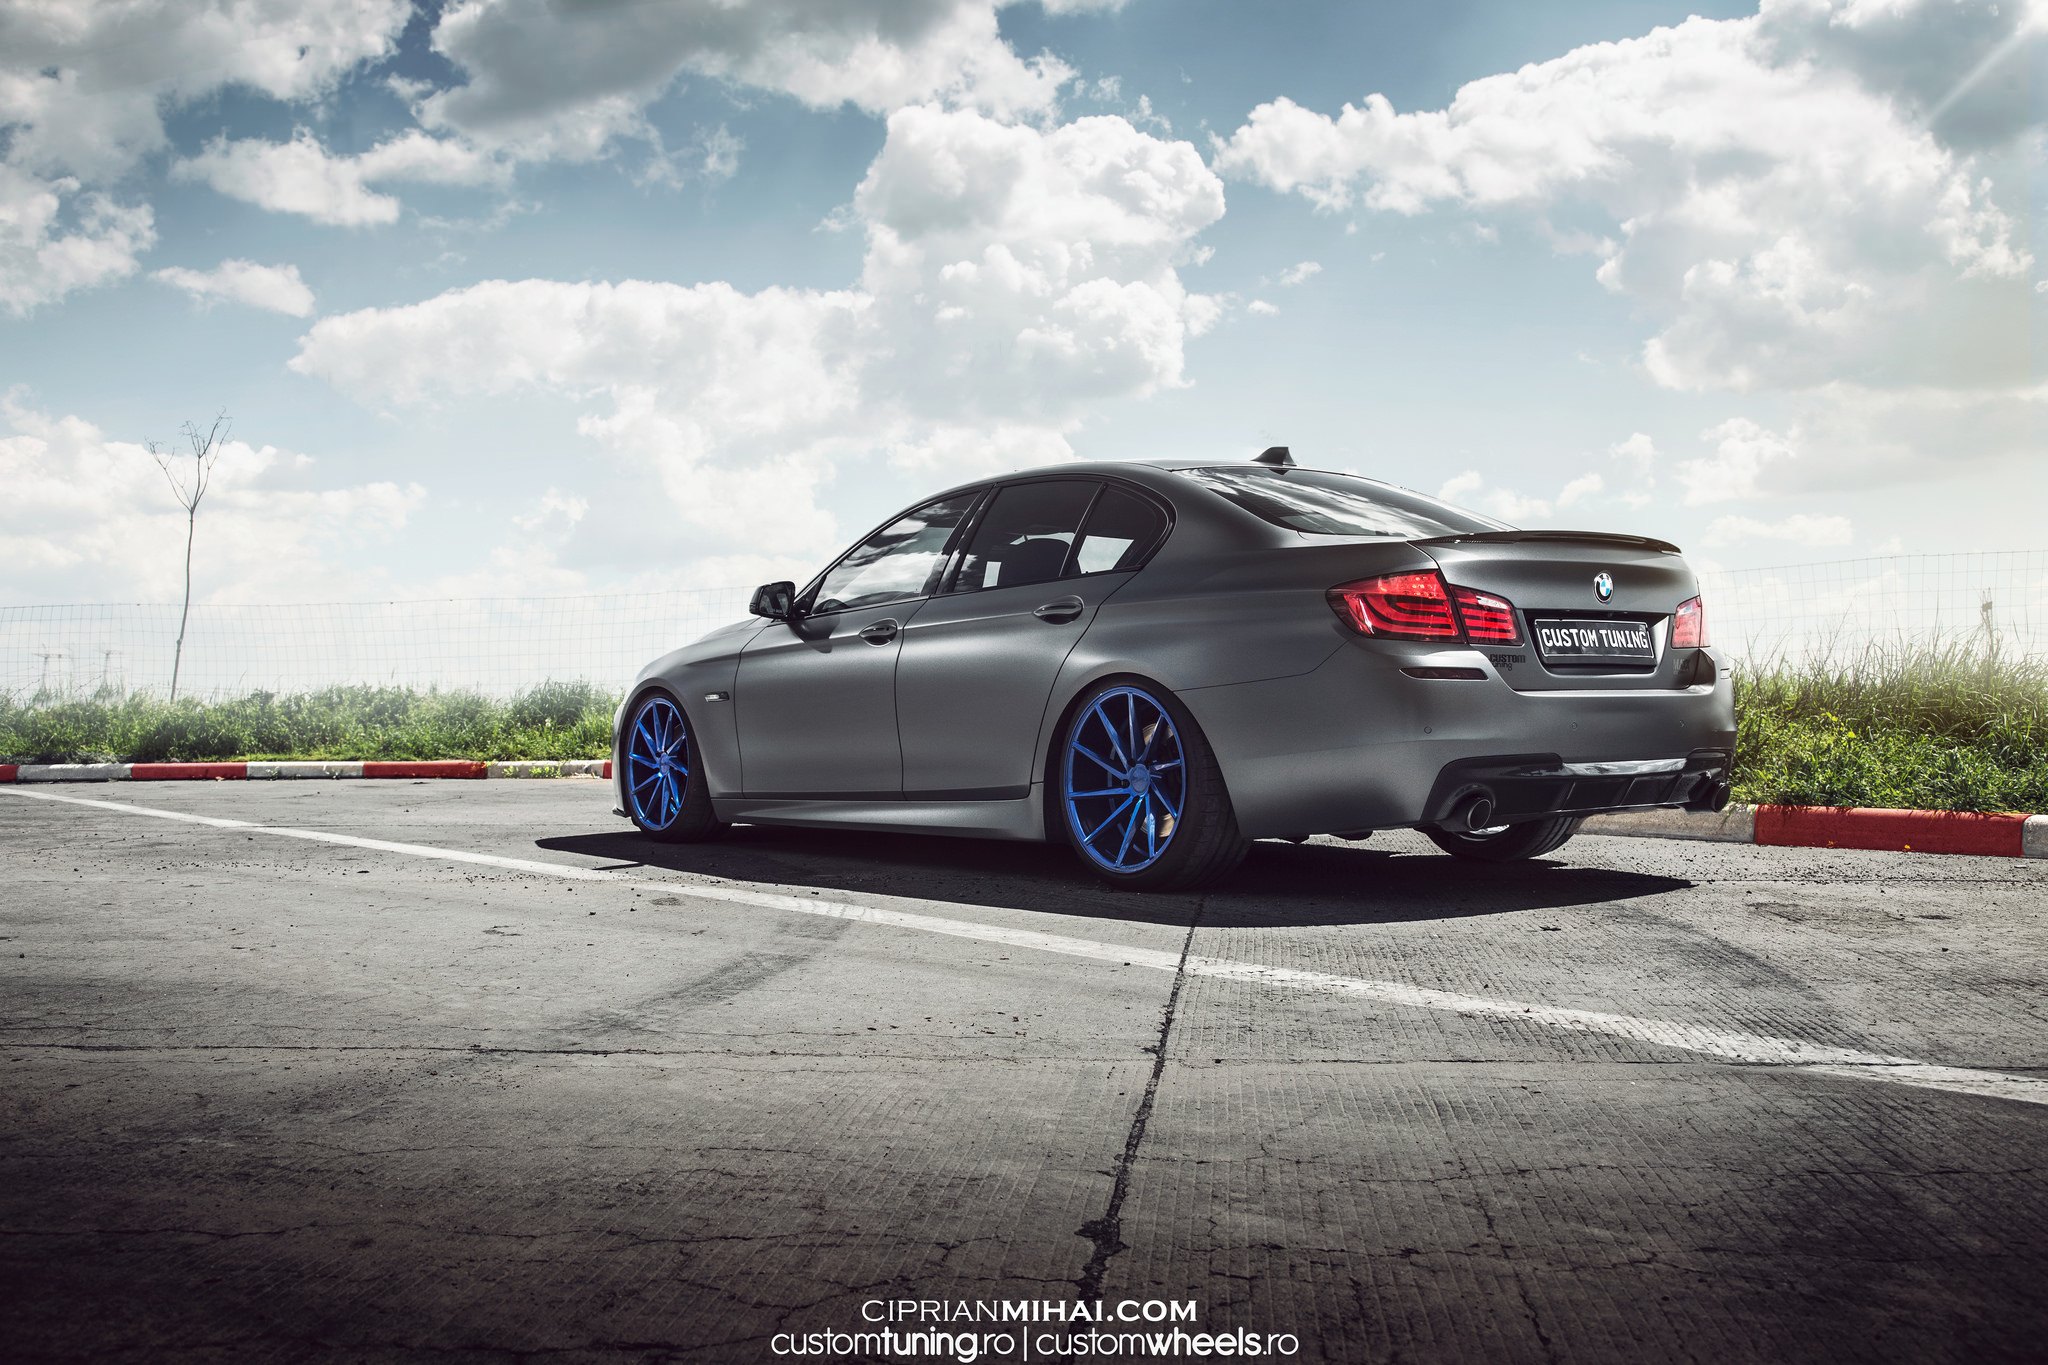 Gray BMW 5-Series with Carbon Fiber Rear Lip Spoiler - Photo by Ciprian Mihai